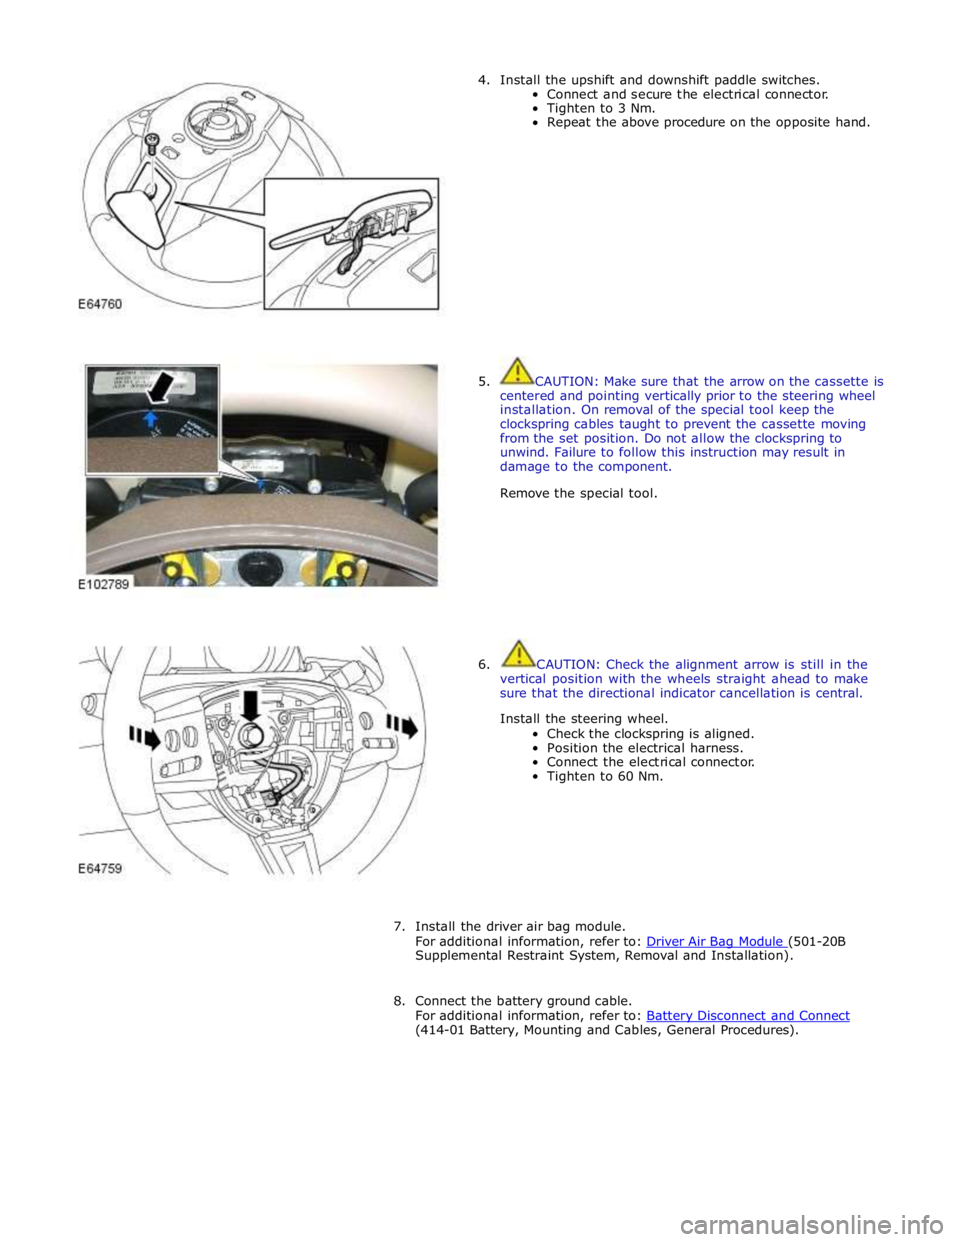 JAGUAR XFR 2010 1.G Workshop Manual 4. Install the upshift and downshift paddle switches. 
Connect and secure the electrical connector. 
Tighten to 3 Nm. 
Repeat the above procedure on the opposite hand. 
 
 
 
 
 
 
 
 
 
 
 
 
 
 
 
5